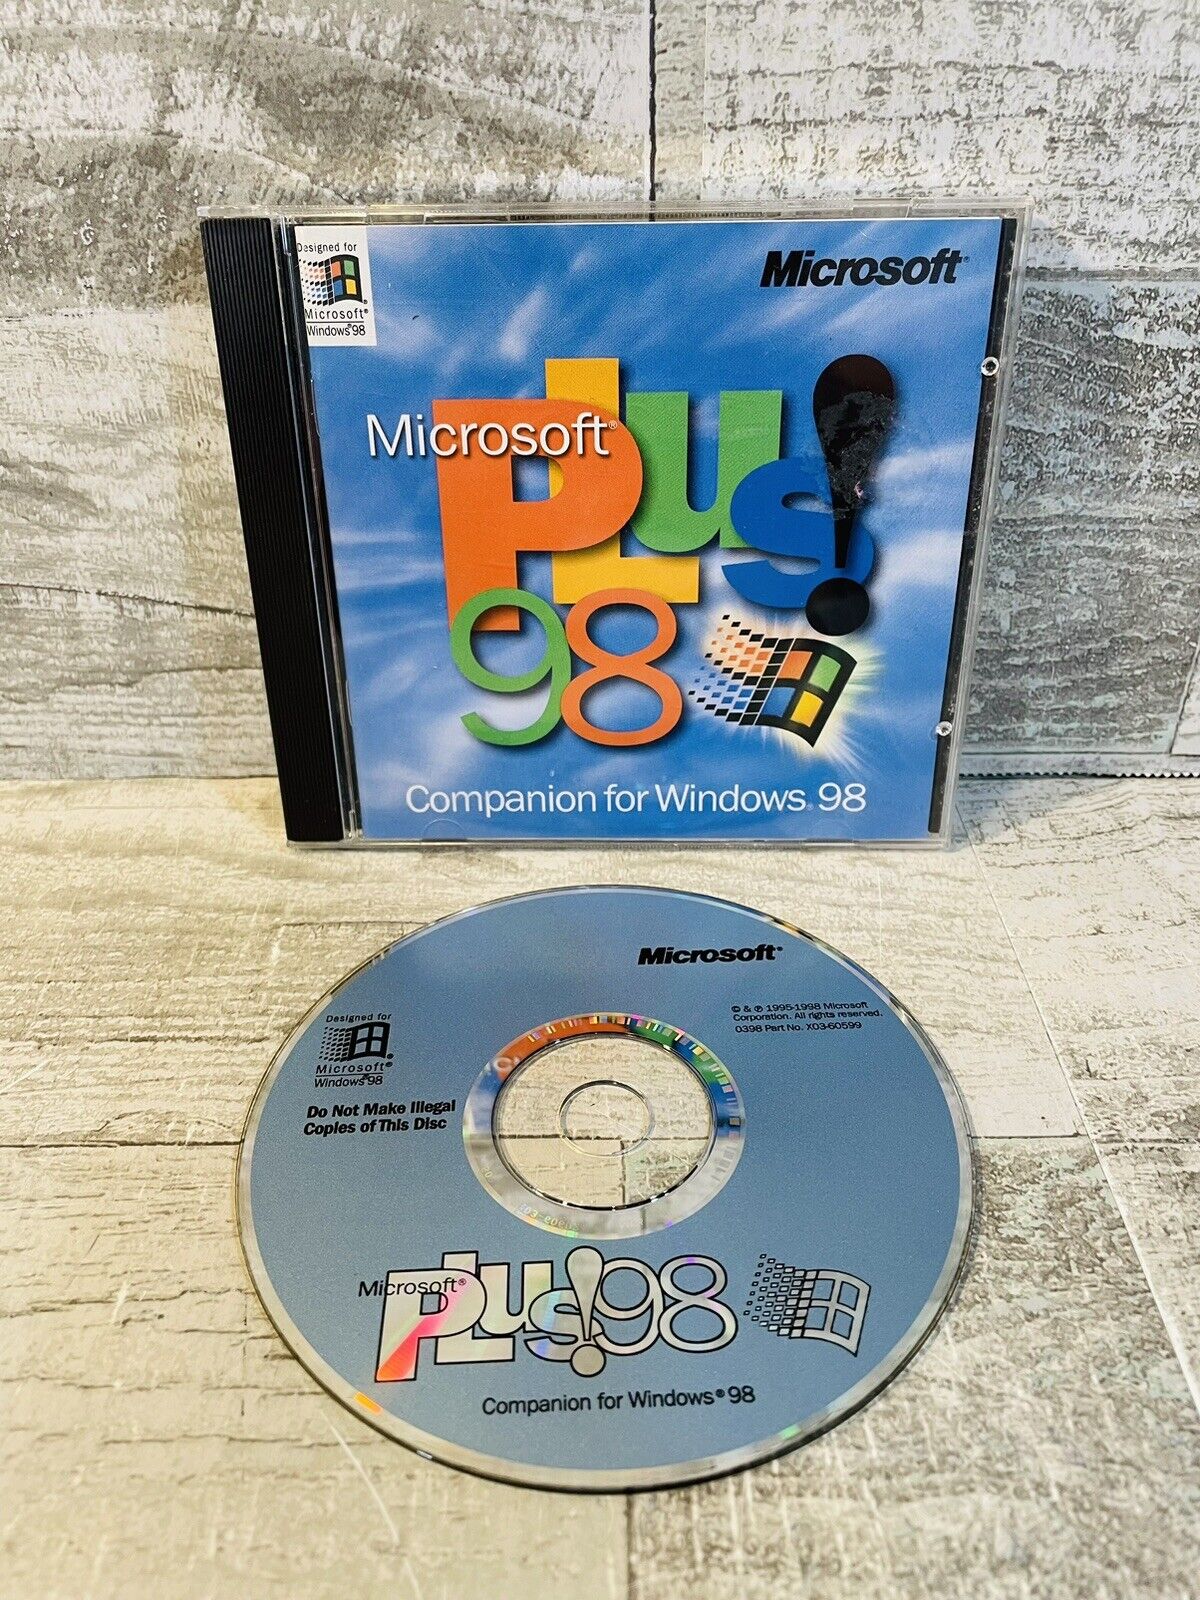 Microsoft Plus 98 Software Companion for Windows 98 with Key - Excellent